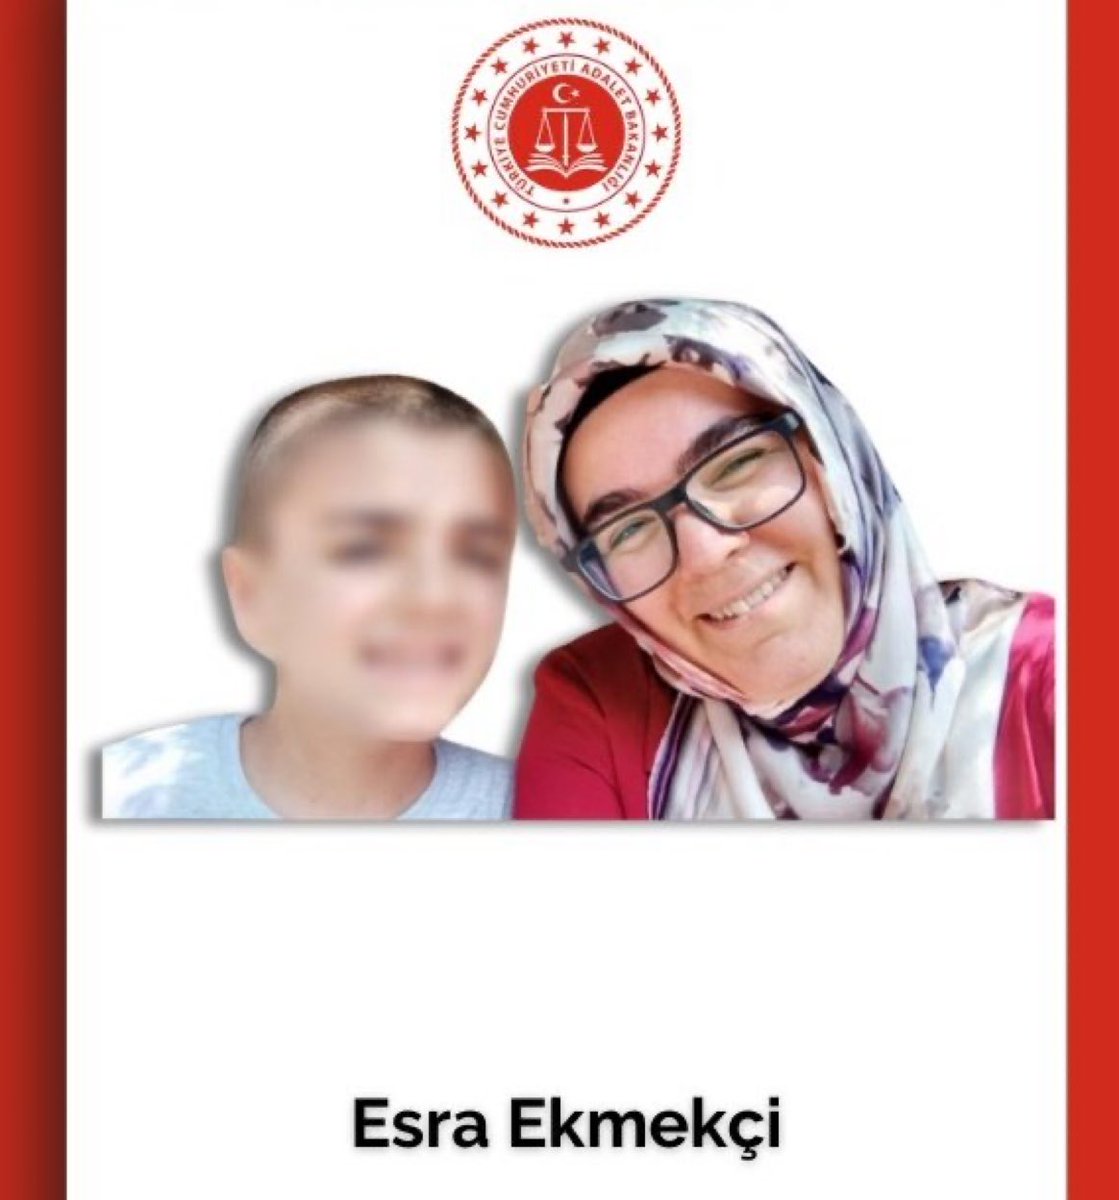 Esra Ekmekçi, mother of three, has been in prison for 1 year. 

Her son Tarık, uncomfortable since his mother's arrest, has autism and constantly asks about his mother.

AnnelerGününde AnalarTutsak
#mothersday2024 #Turkey #HumanityForAll